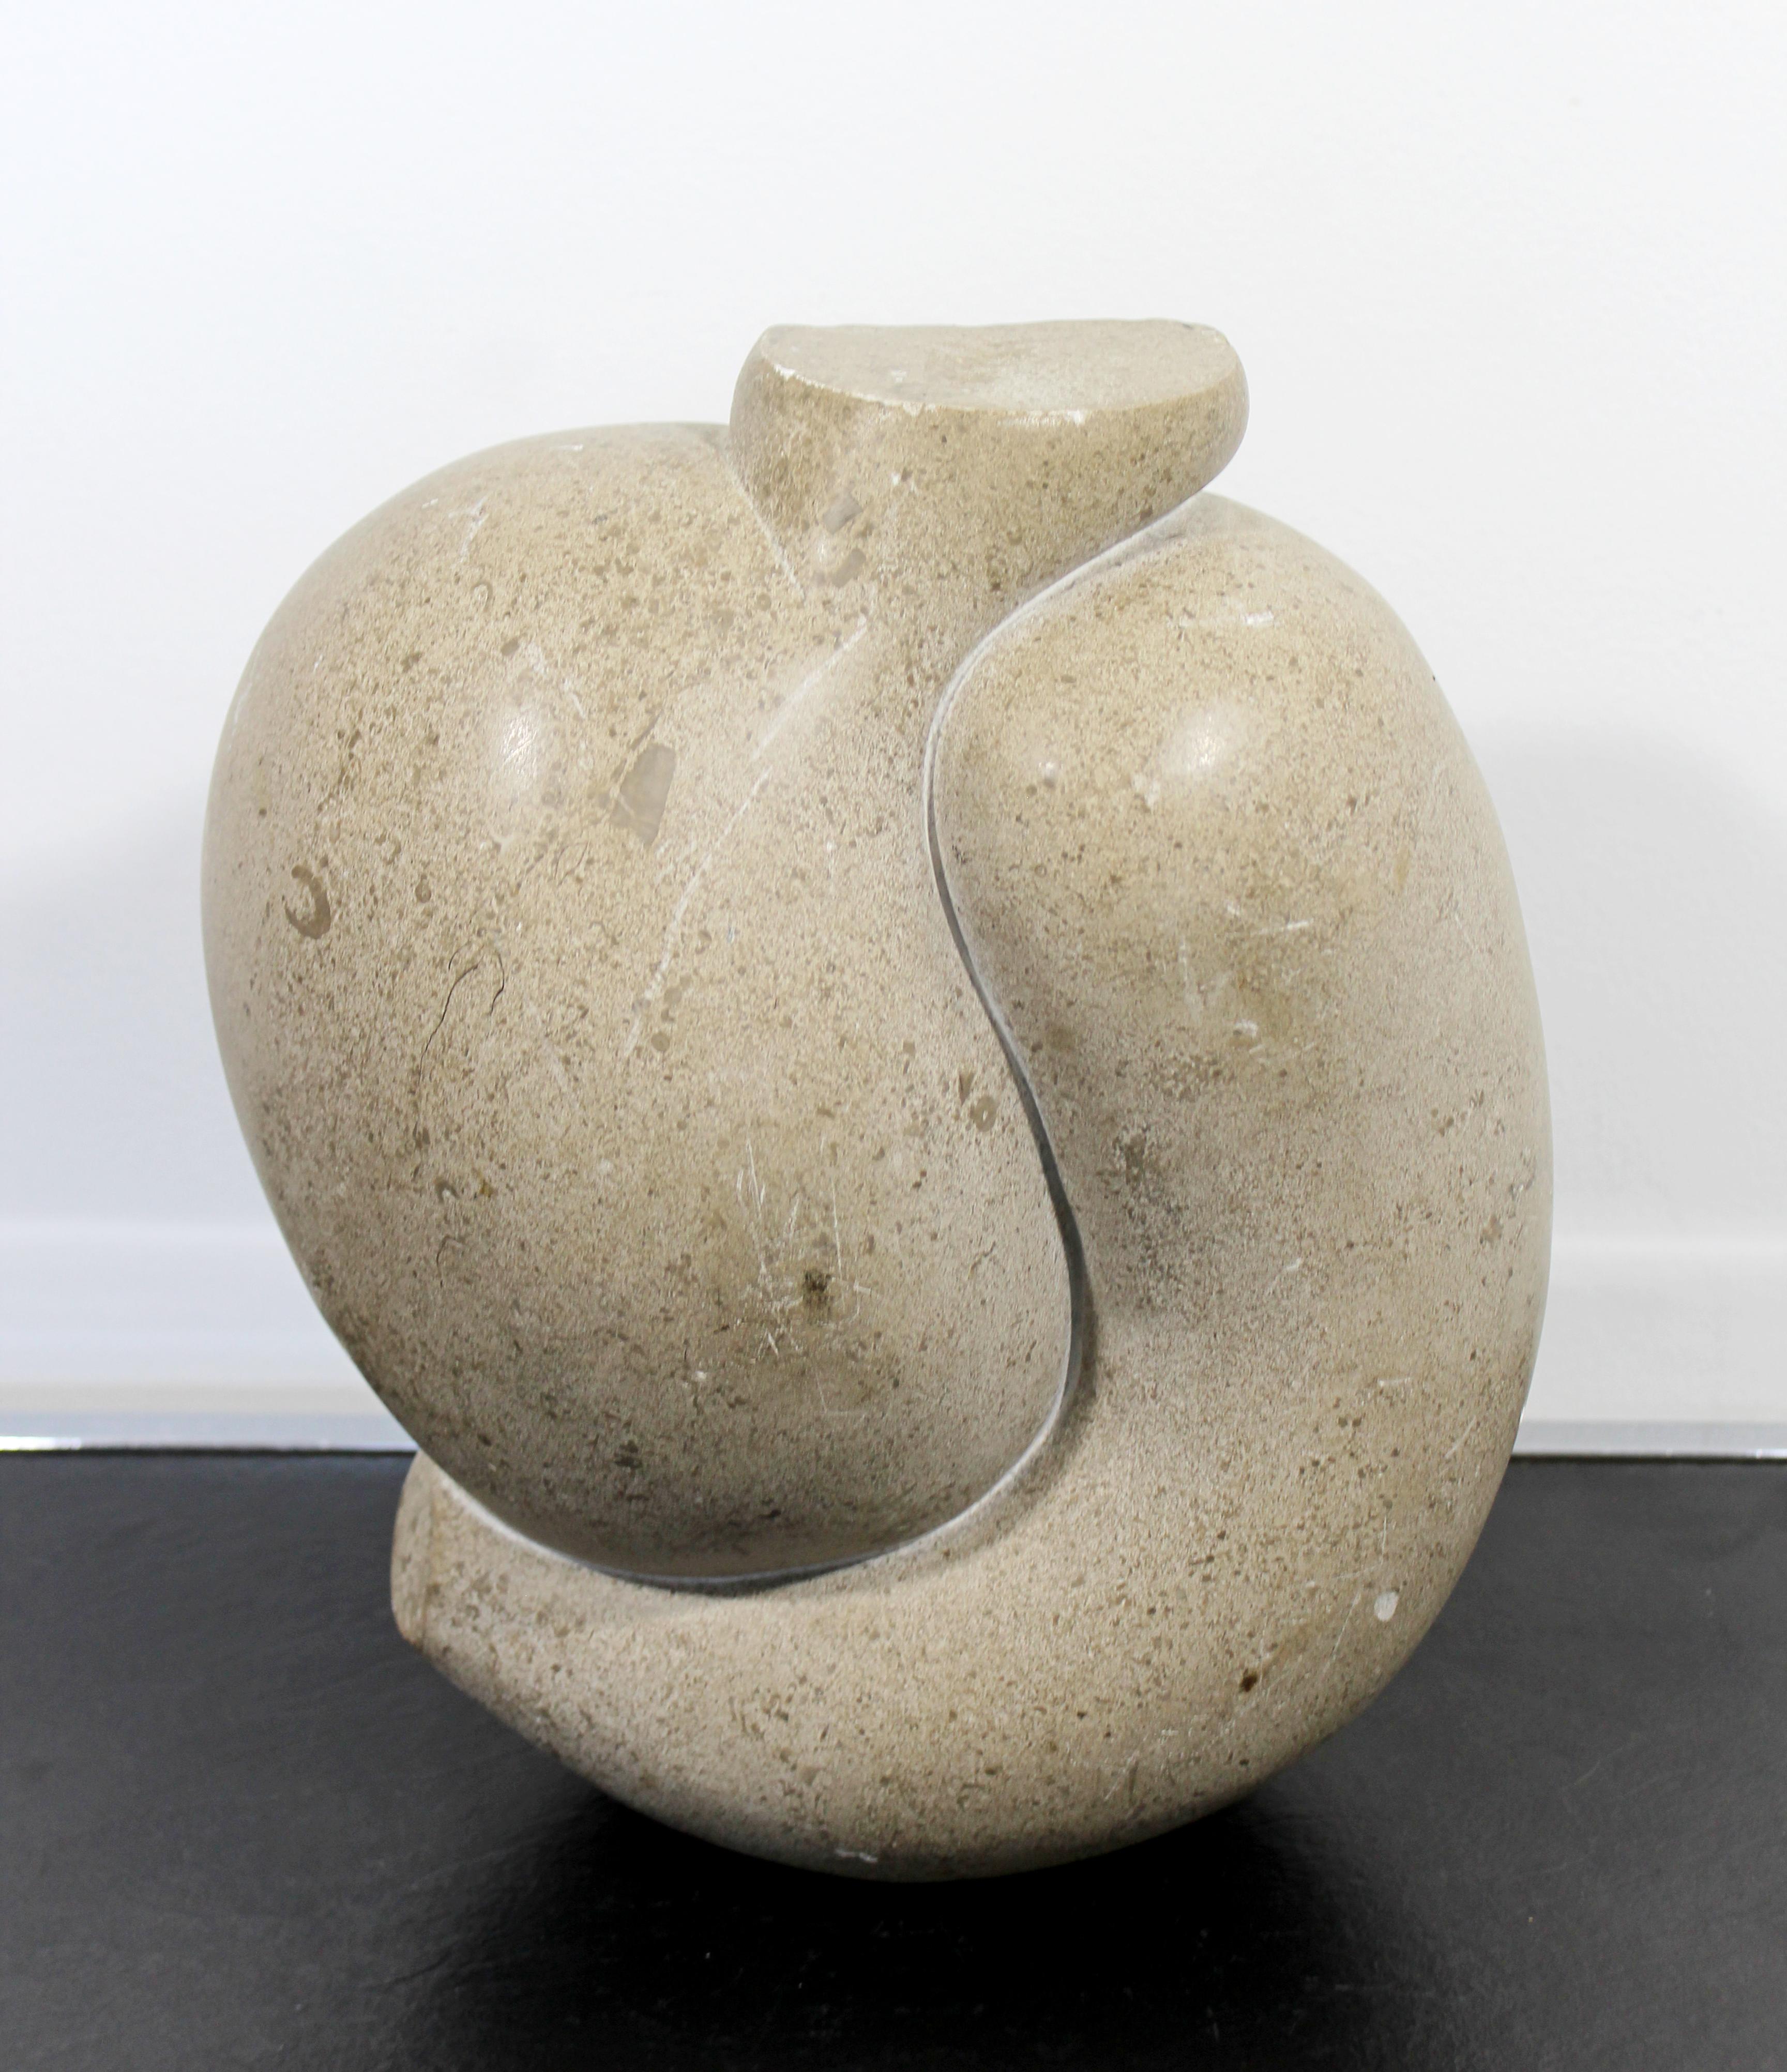 For your consideration is a beautiful, abstract stone table sculpture, entitled 